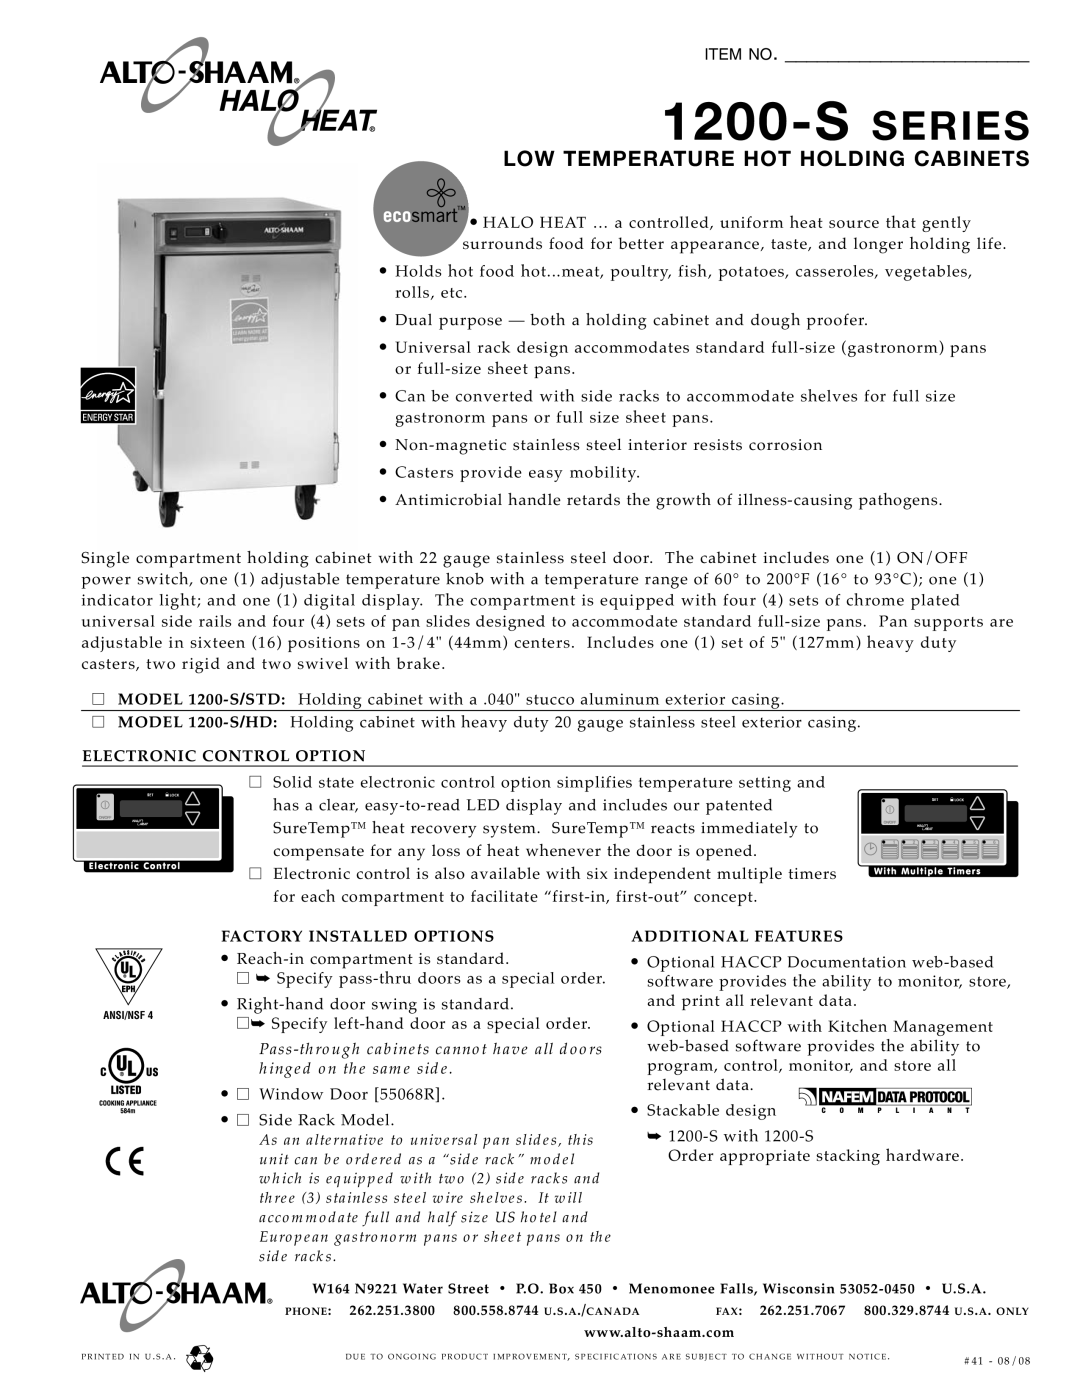 Alto-Shaam specifications S Series, Low Temperature Hot Holding Cabinets, Item No, MODEL 1200-S/STD, MODEL 1200-S/HD 